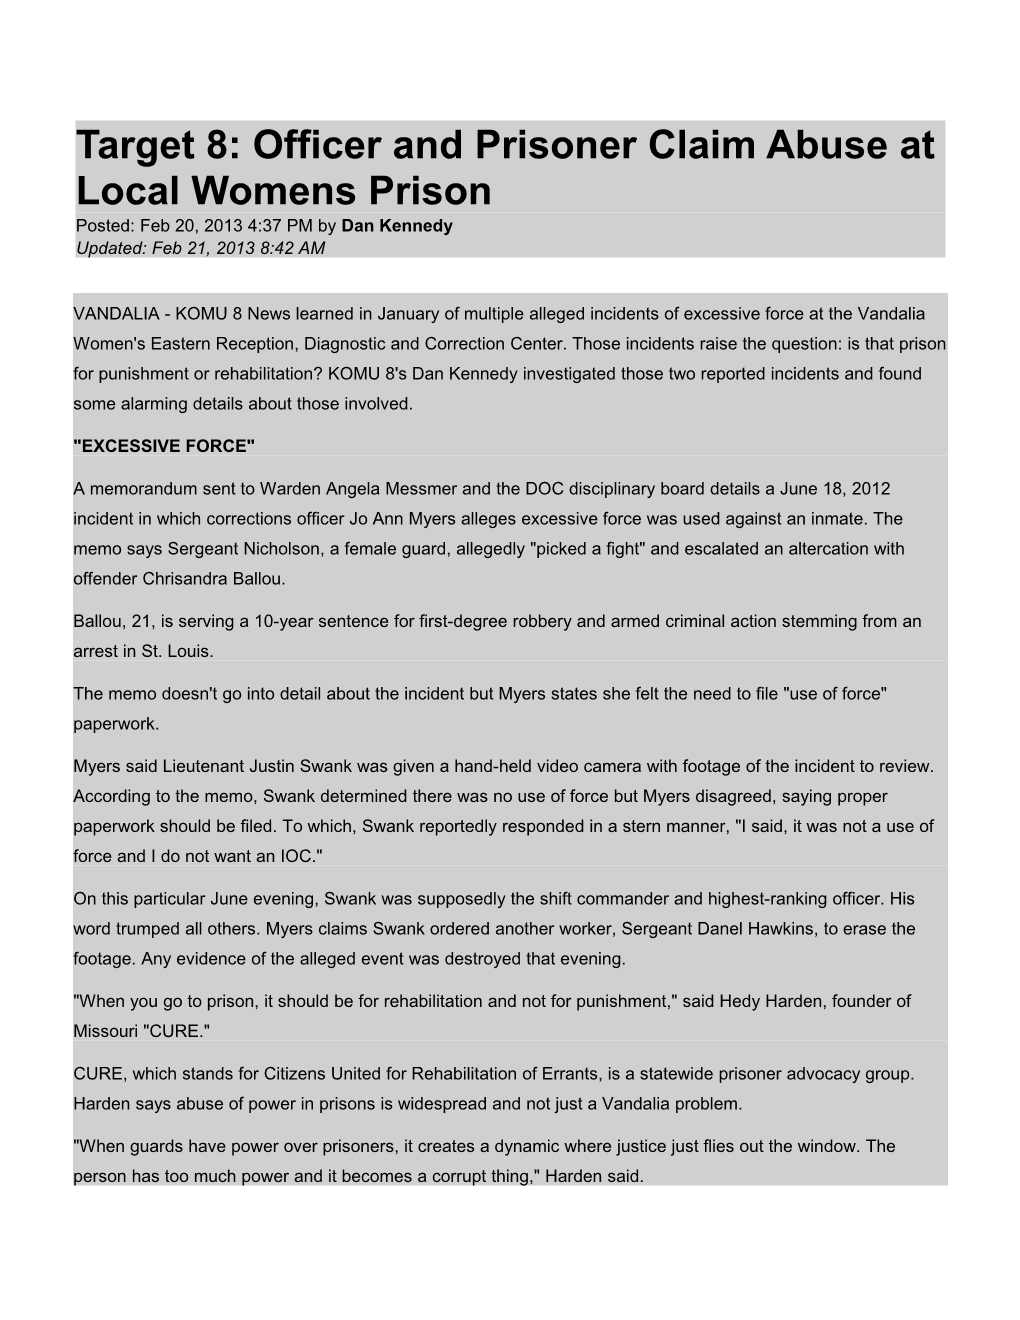 Target 8: Officer and Prisoner Claim Abuse at Local Womens Prison